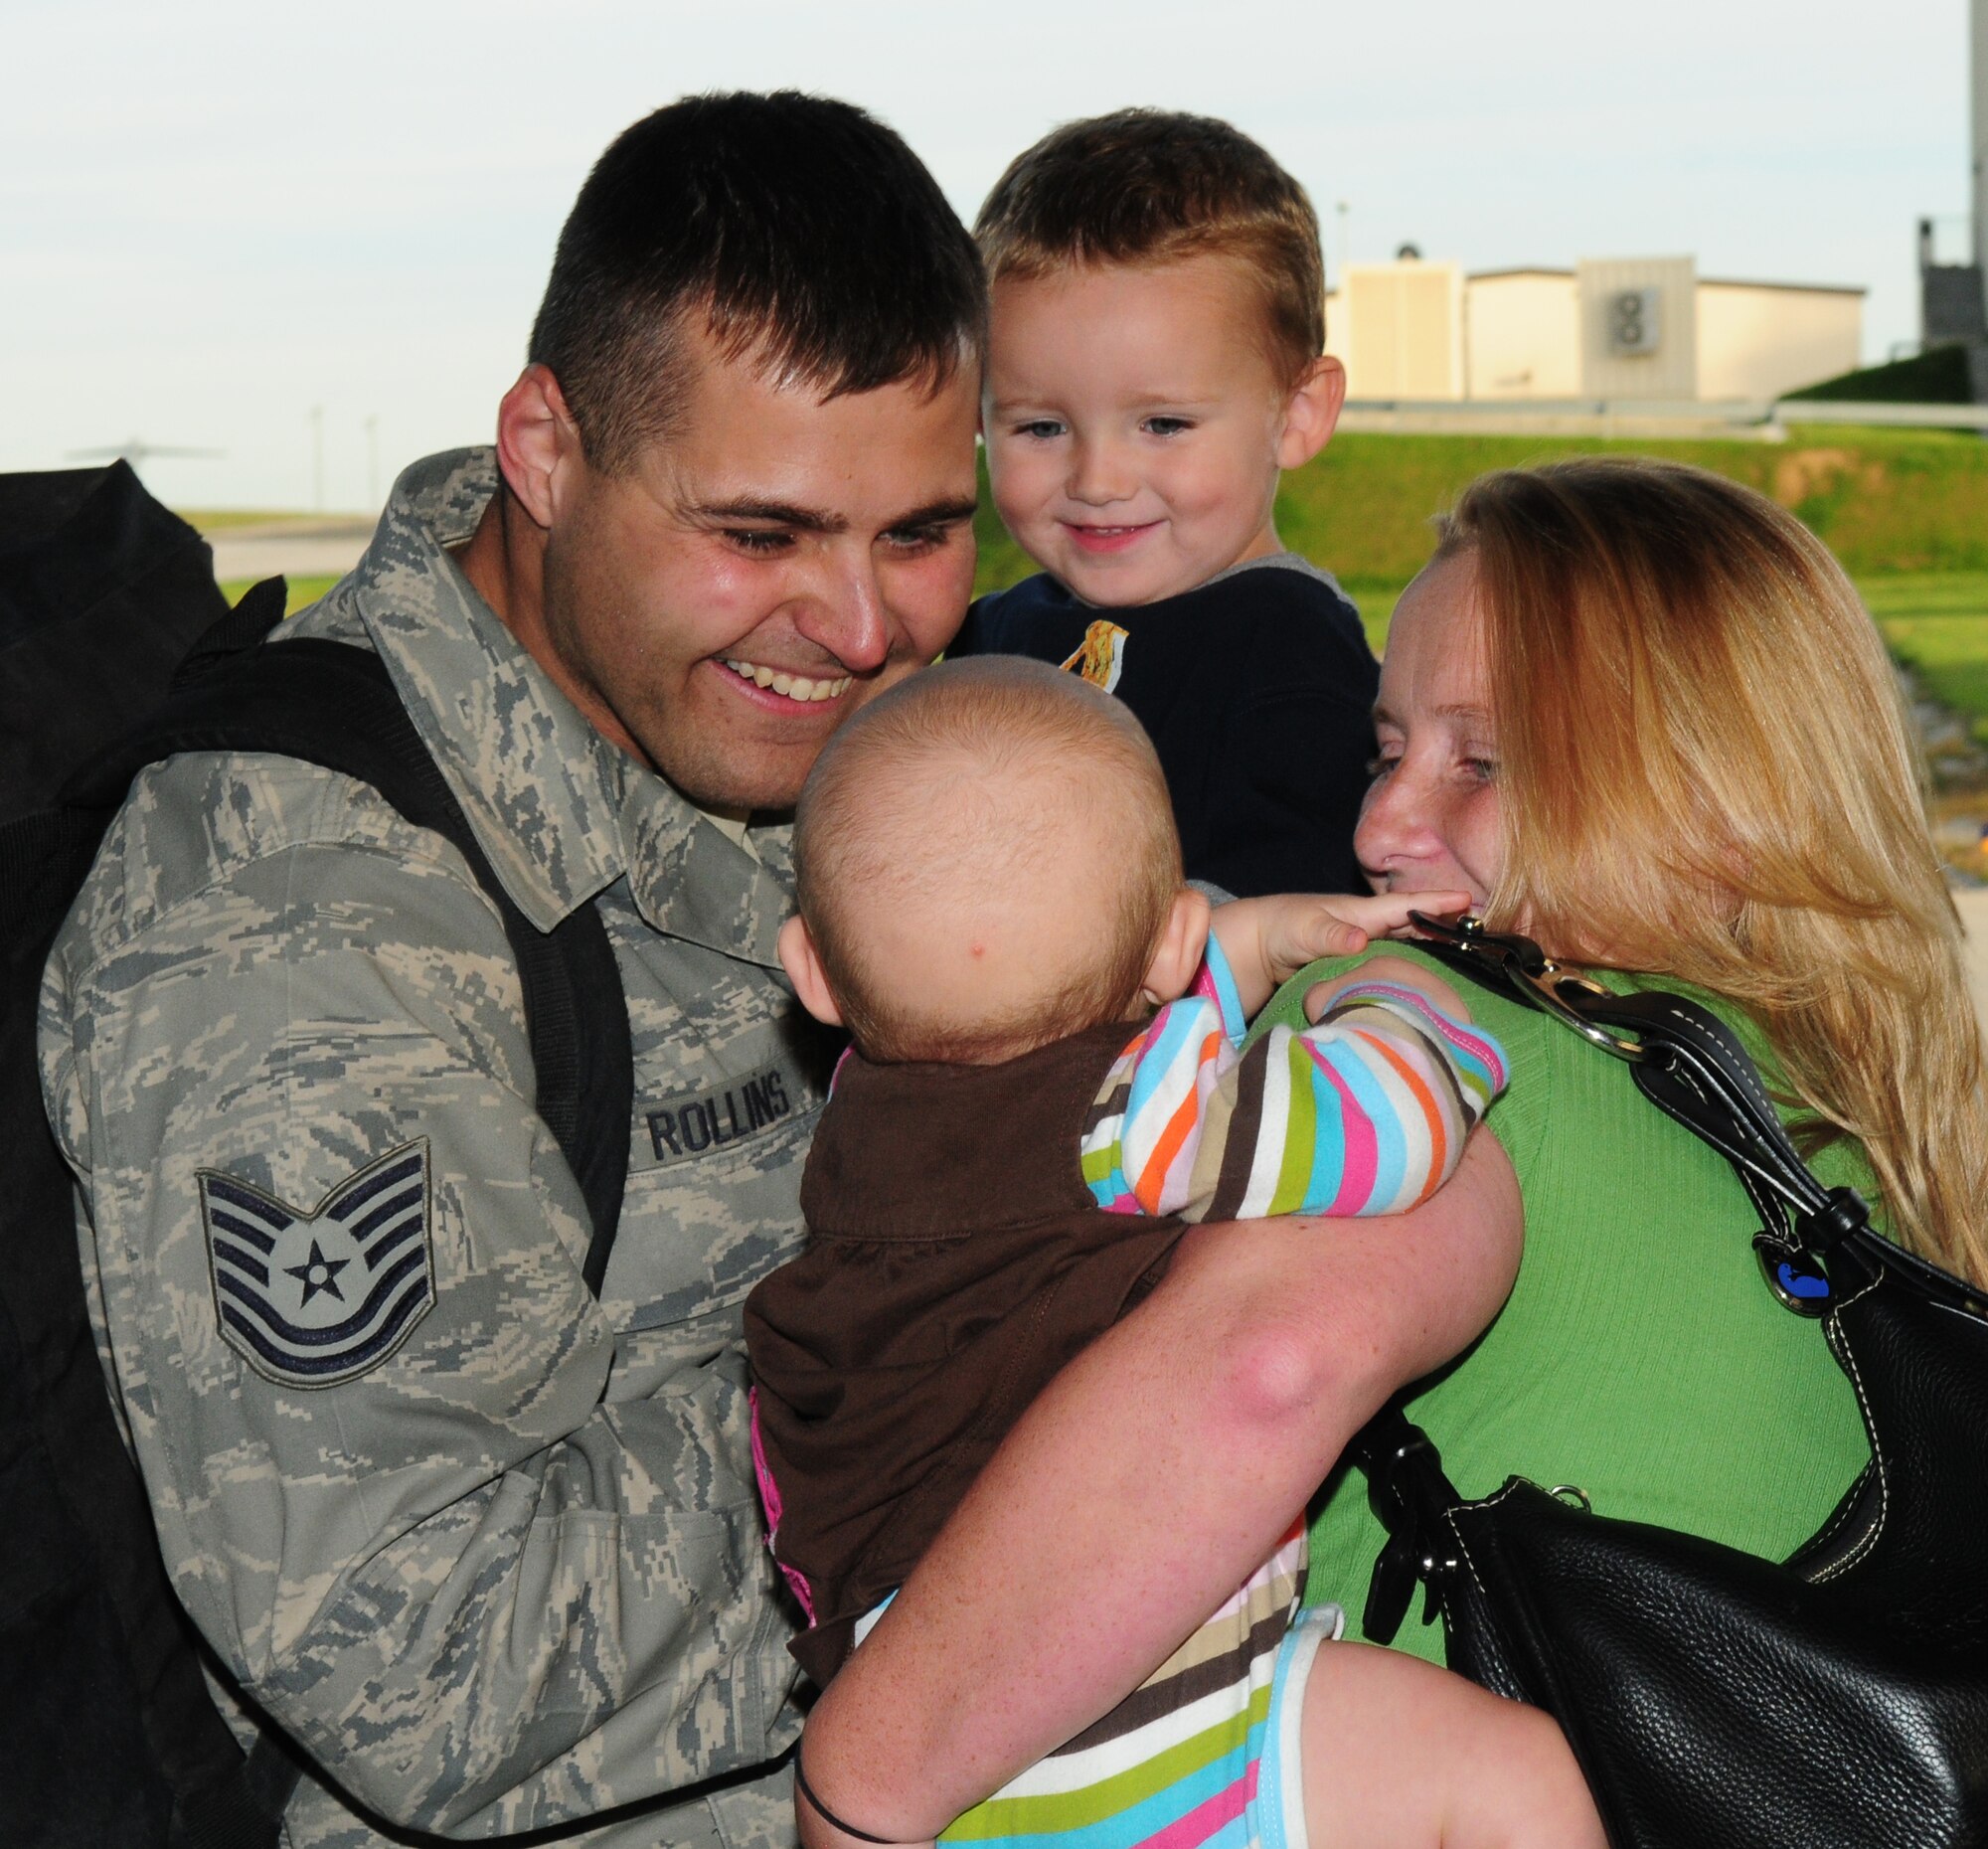 SPANGDAHLEM AIR BASE, Germany – Tech. Sgt. Randy Rollins, 52nd Equipment Maintenance Squadron, is greeted by his family upon returning from a deployment to Afghanistan.  Sergeant Rollins was deployed in support of the 81st Fighter Squadron.  (U.S. Air Force photo/Staff Sgt. Heather M. Norris)